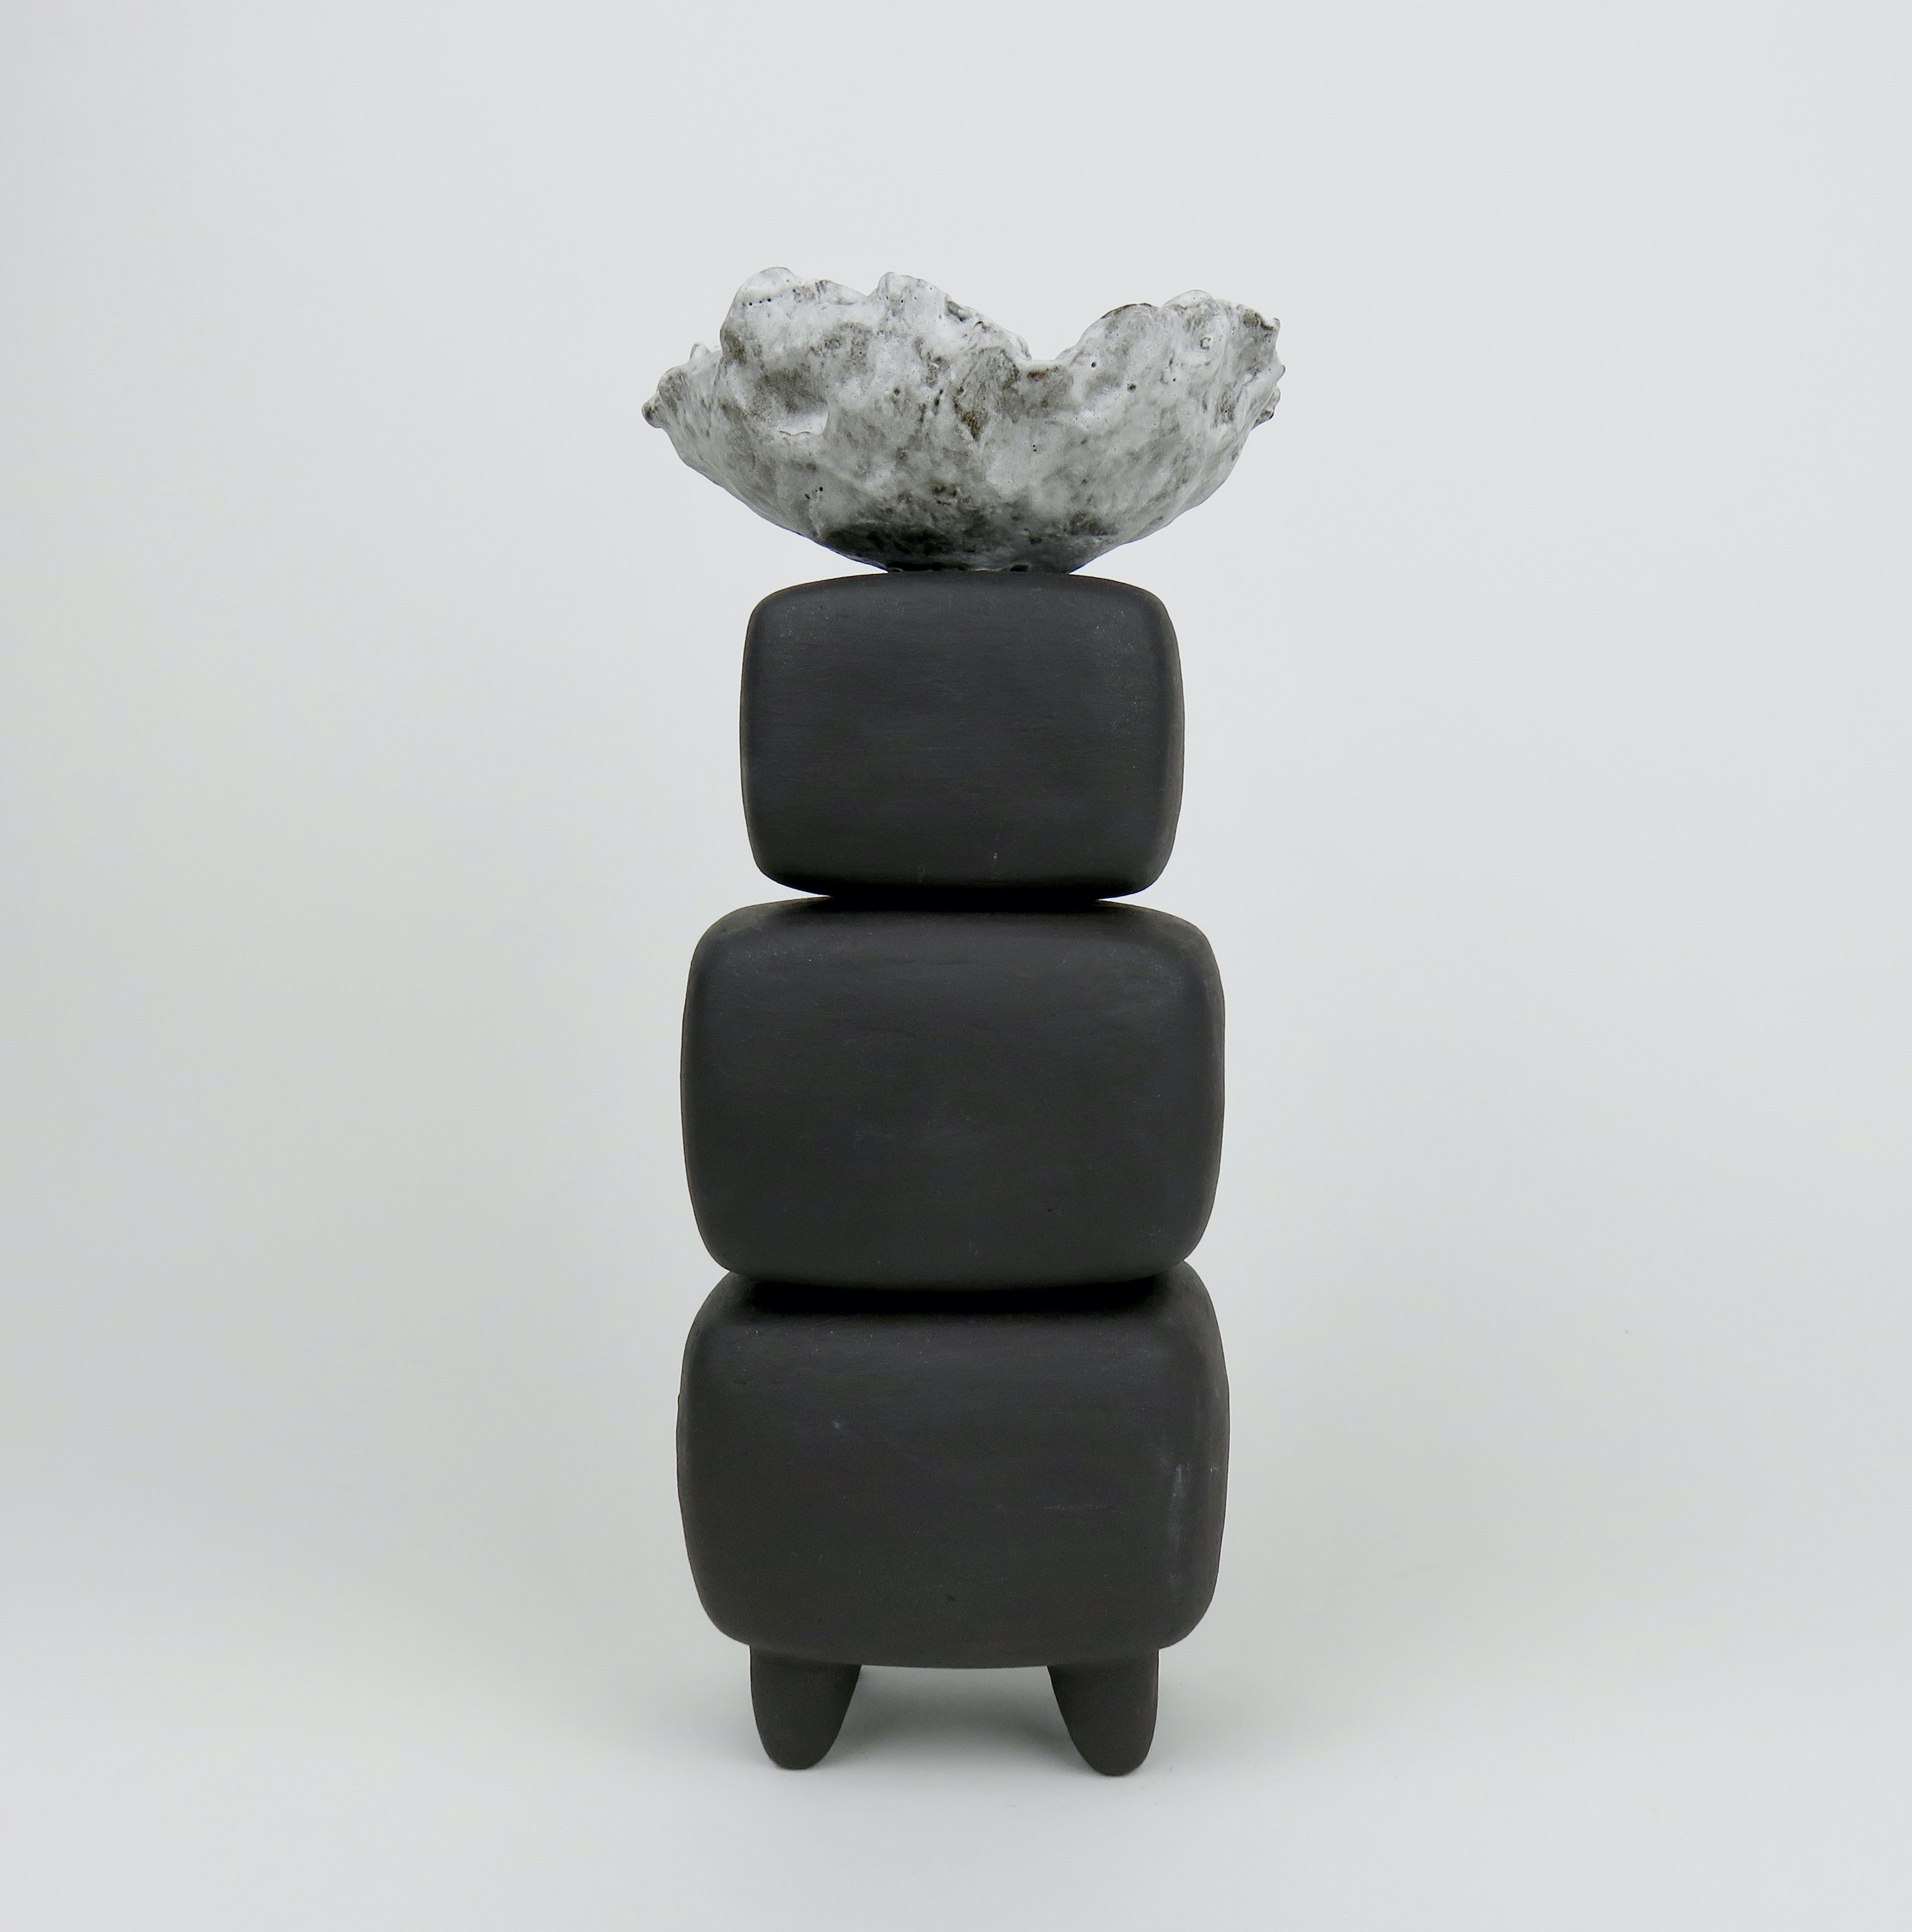 American Hand Built Ceramic Sculpture, Dark Brown Stacked Cubes with White Crinkled Top